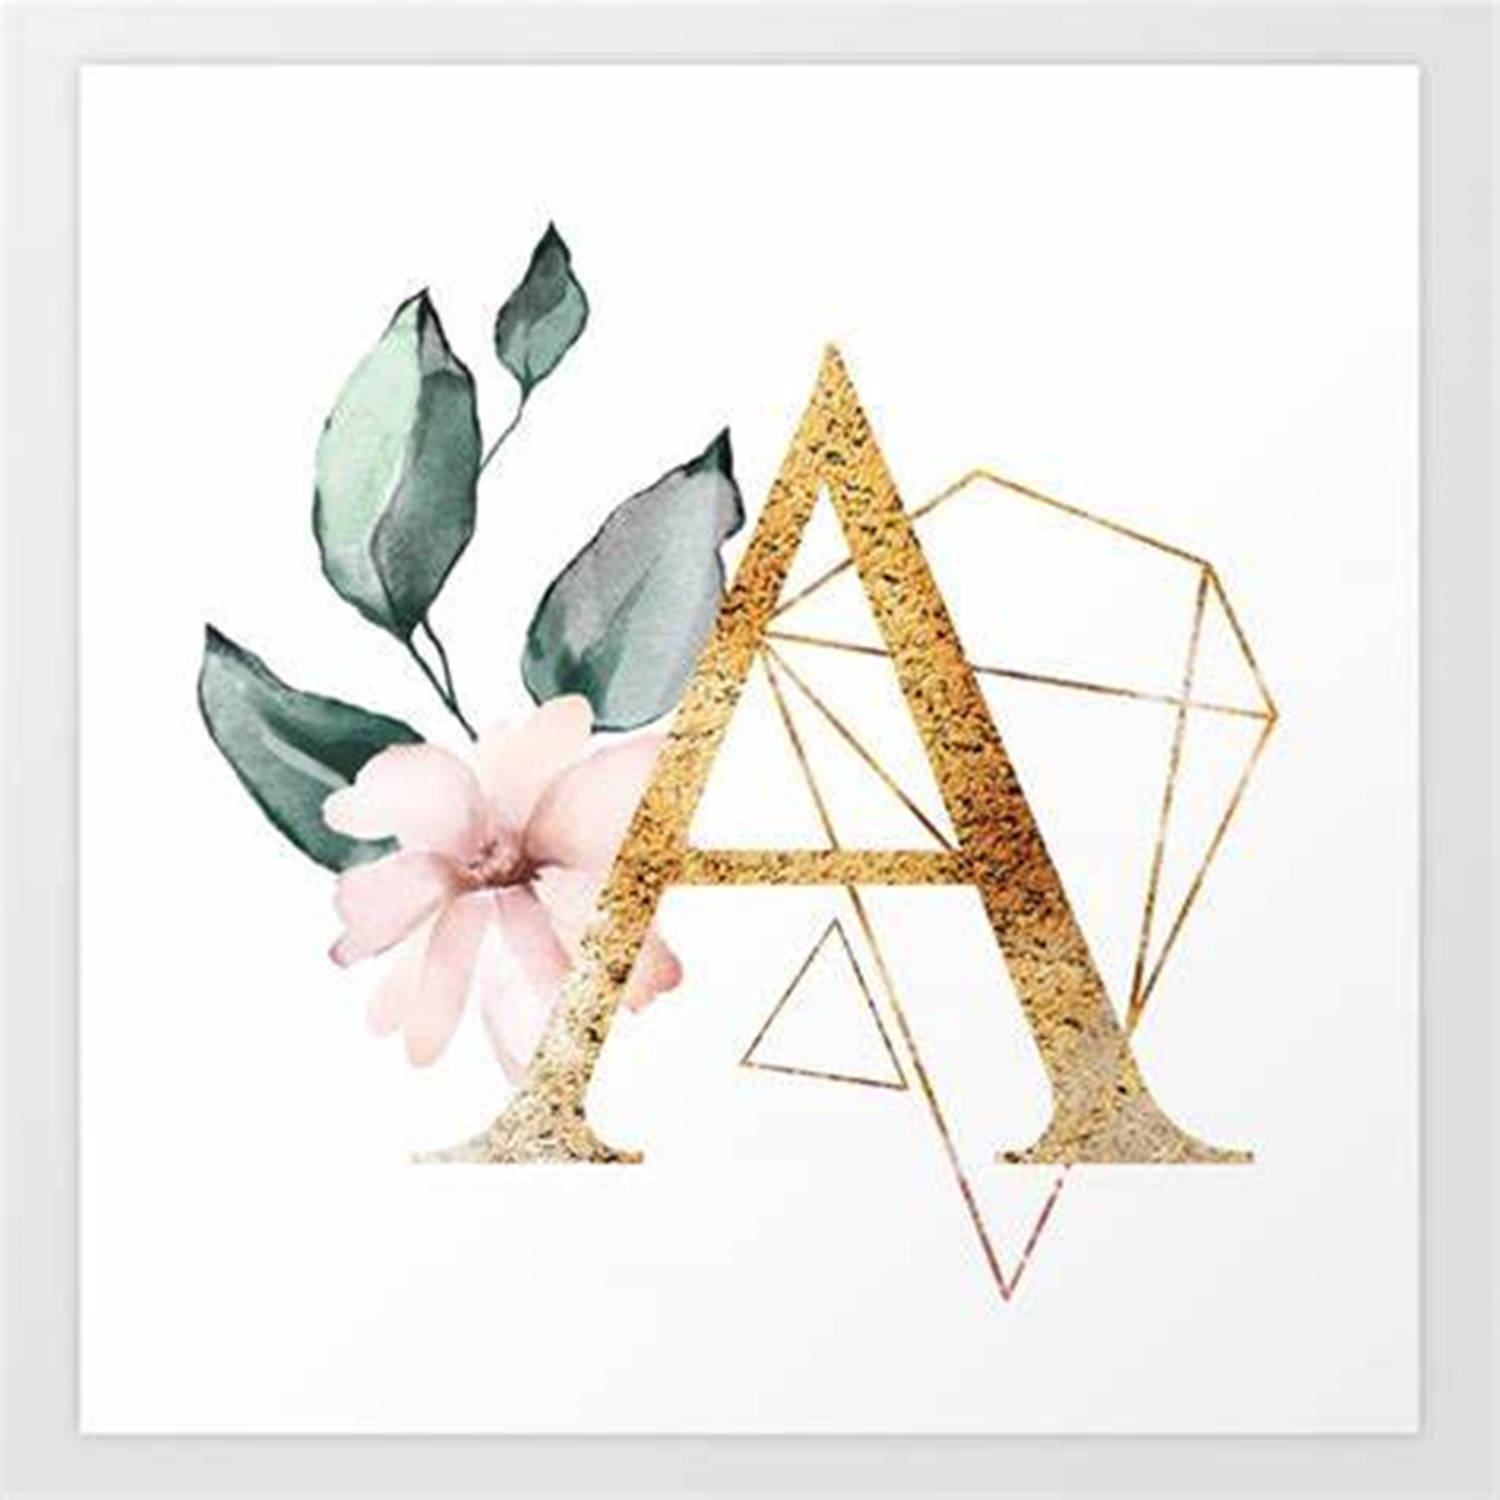 Extravagant Golden Capital Alphabet Letter A With Brilliant Diamonds And Adorned With Elegant Flowers Background